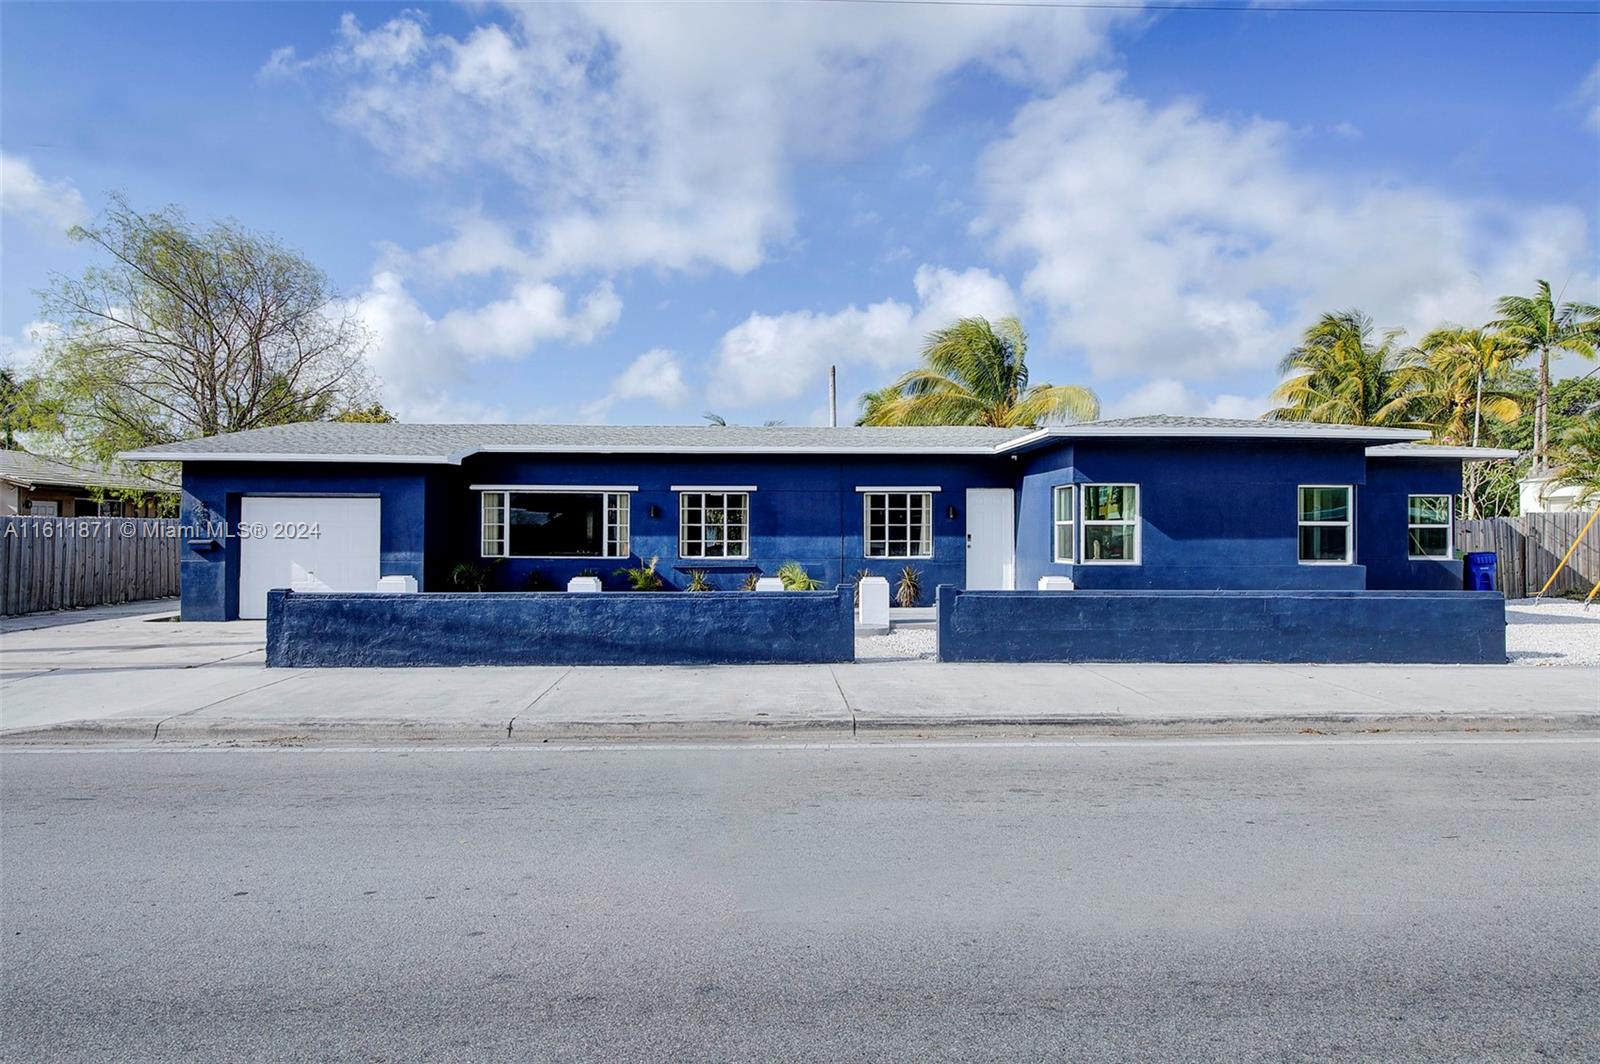 Rental Property at 417 Sw 12th St, Fort Lauderdale, Broward County, Florida -  - $850,000 MO.